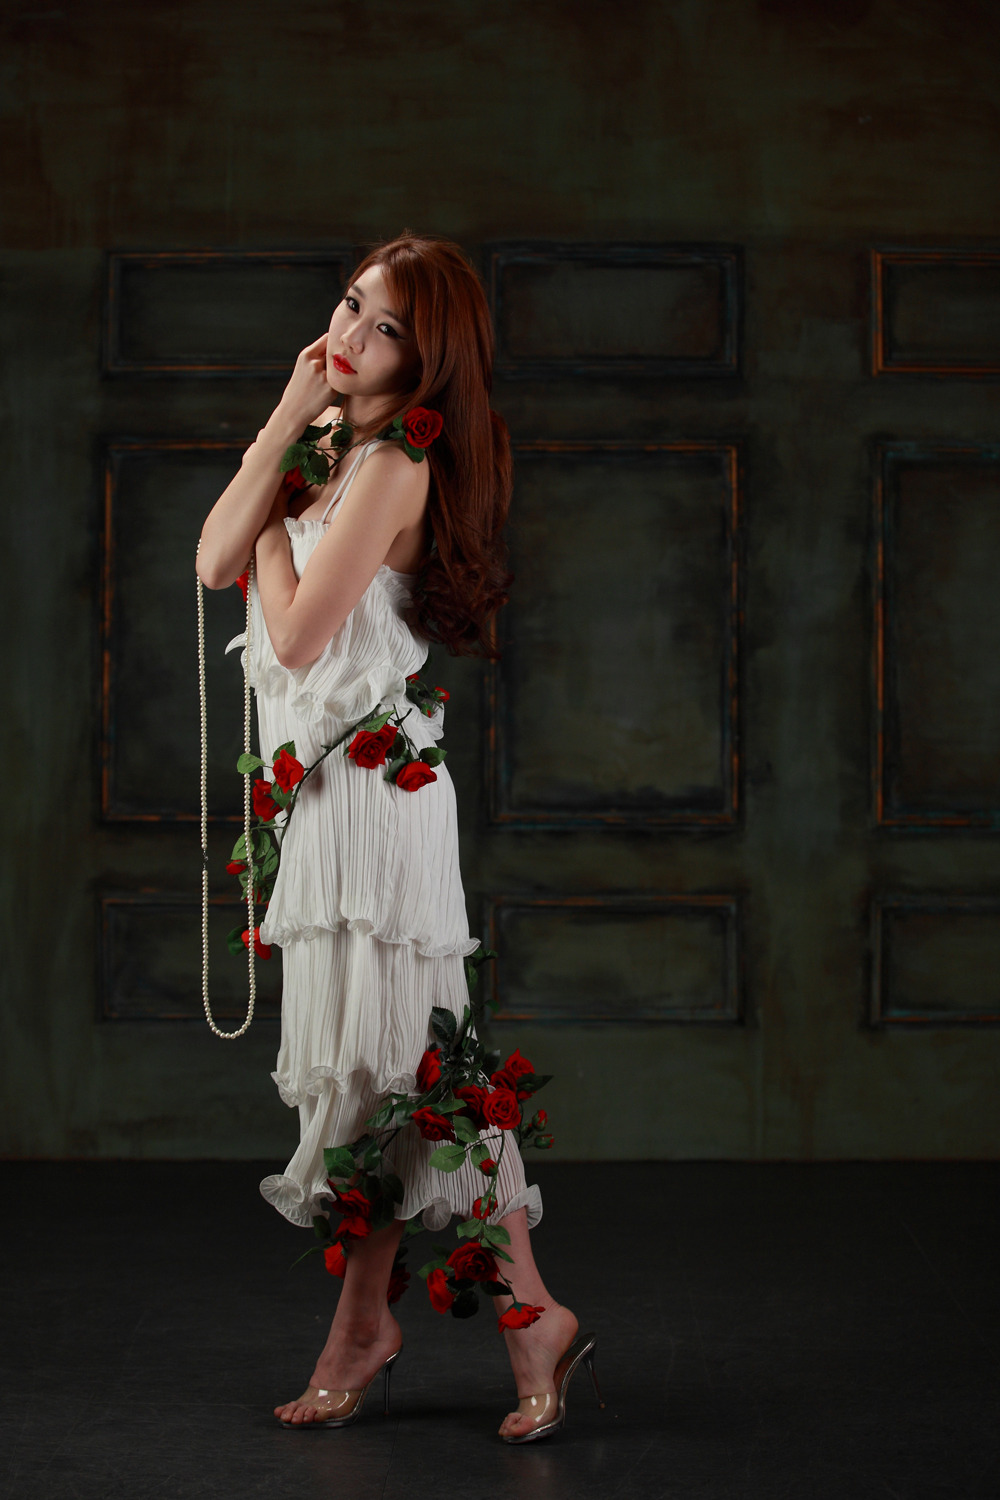 Go Jung Ah Korean lady in white maxi and red roses.